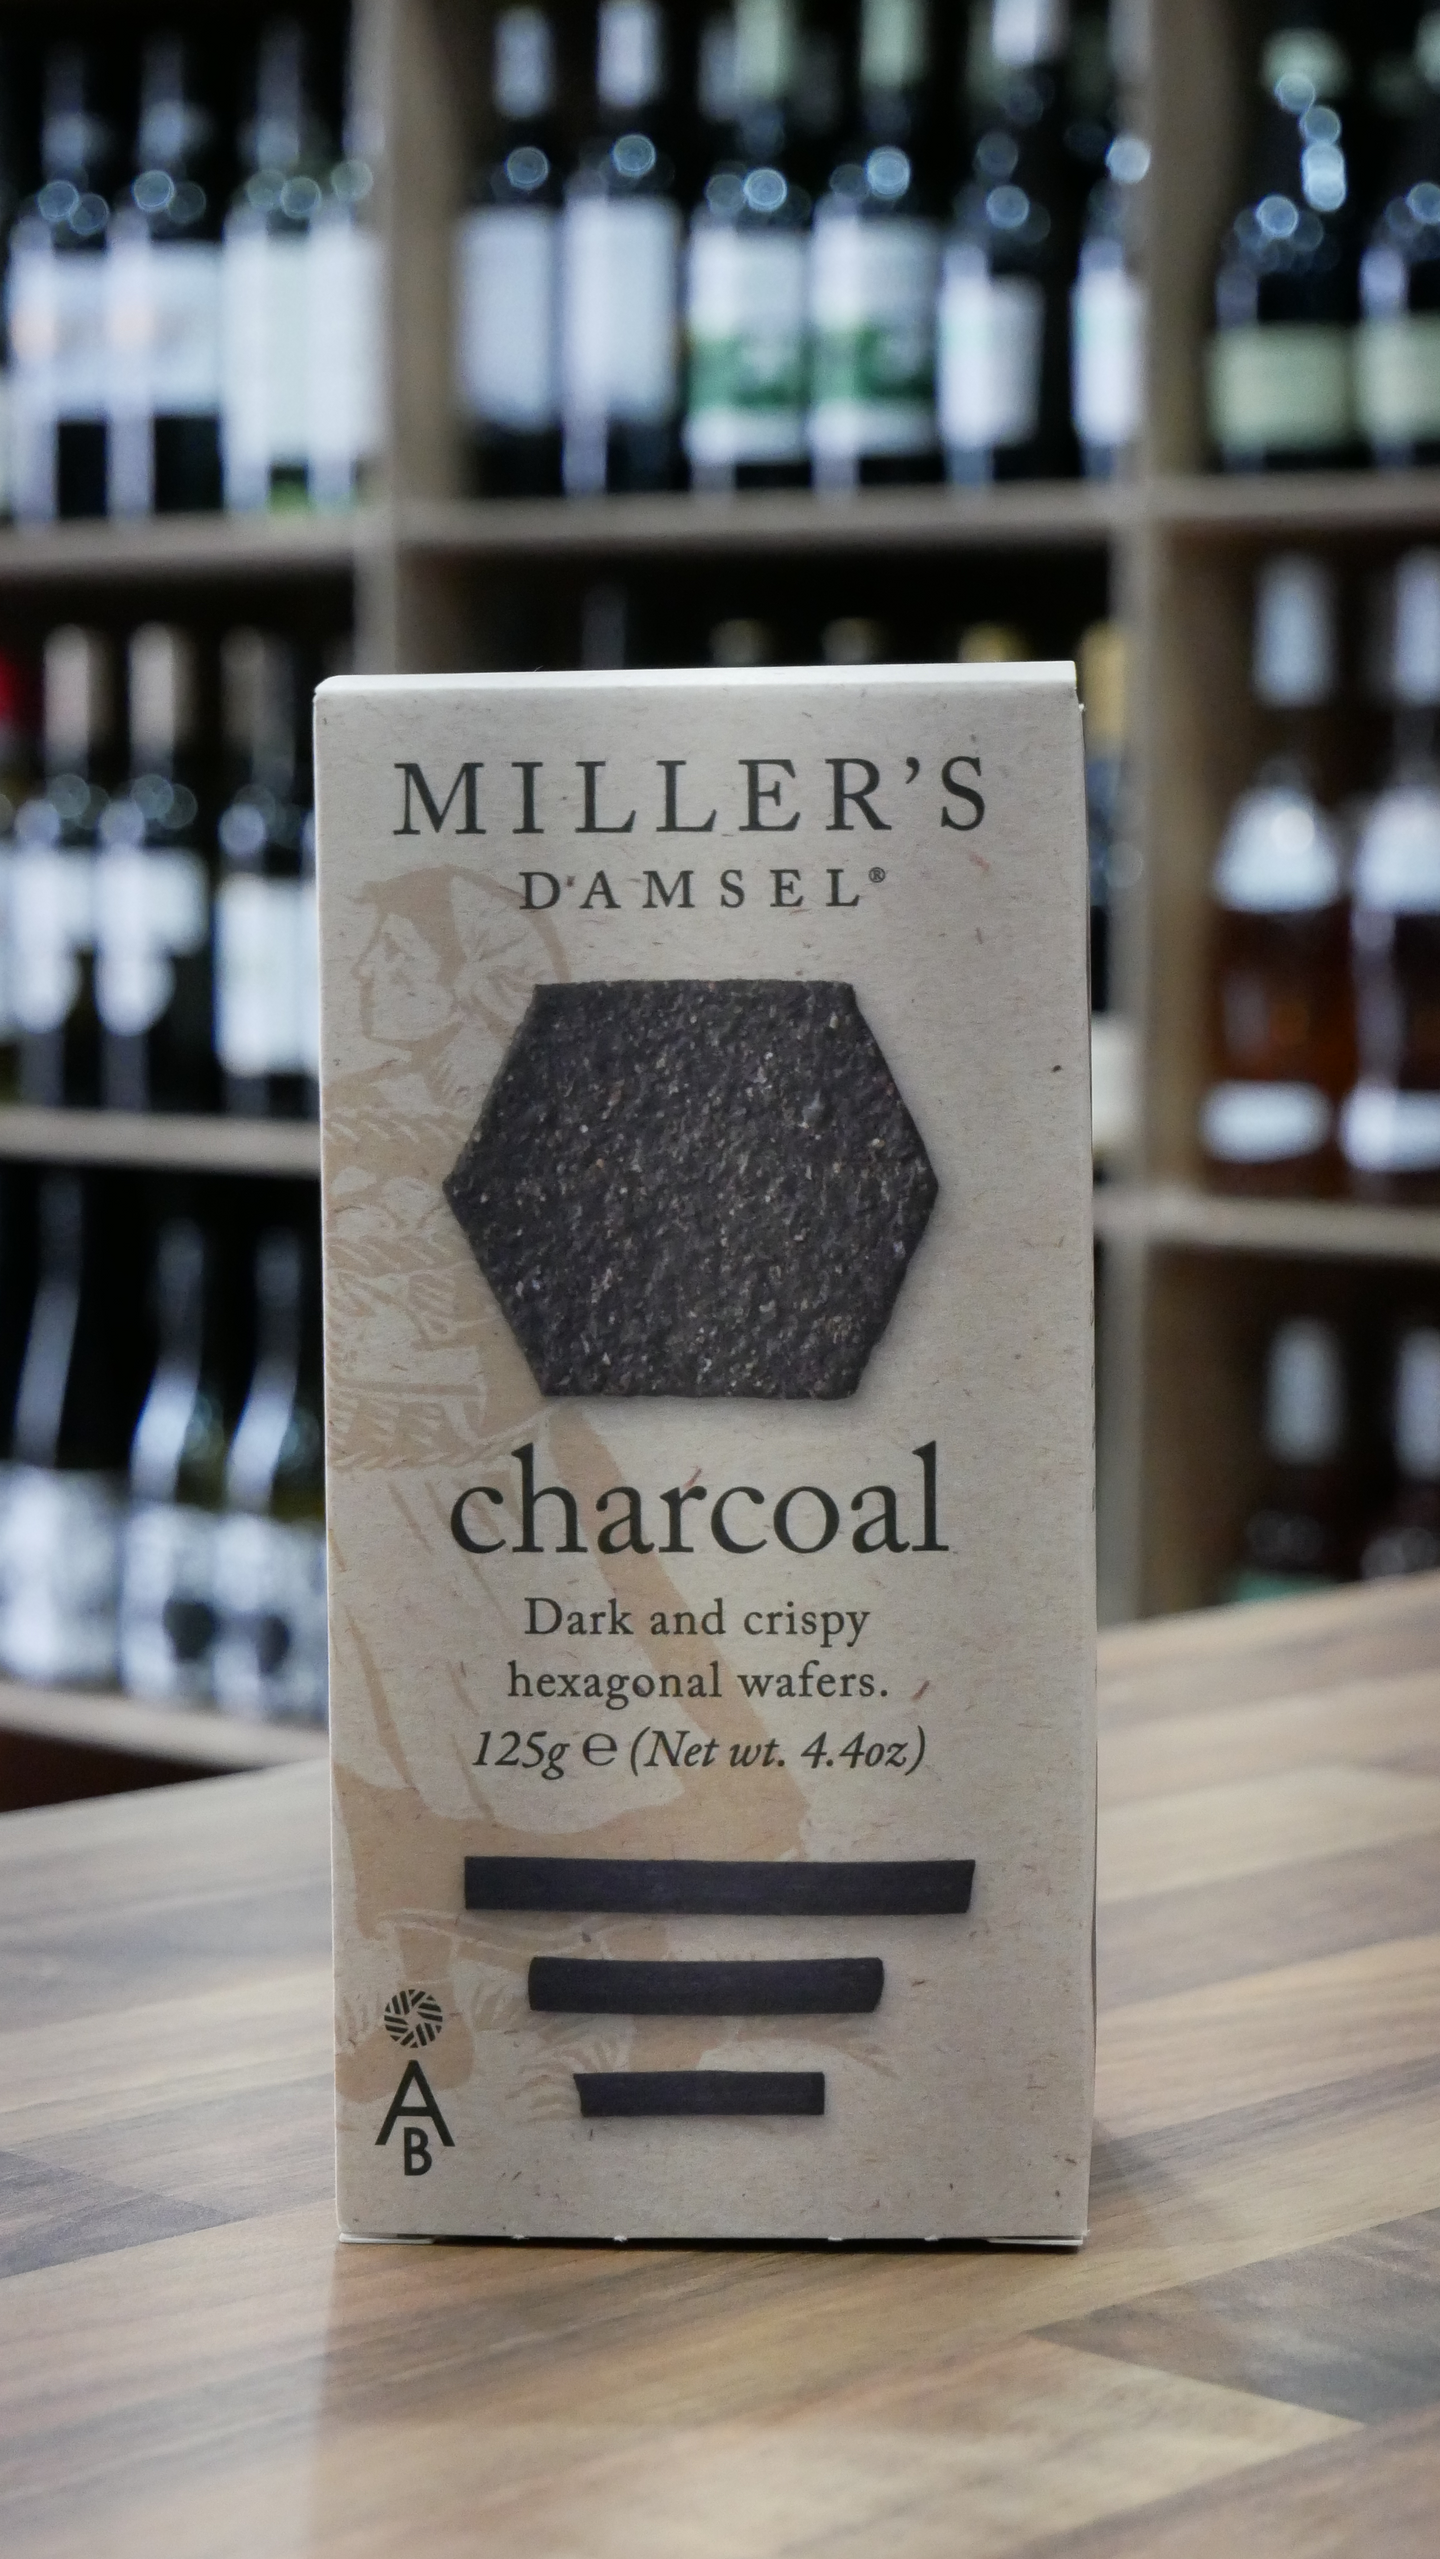 Miller's Damsel Charcoal Wafer Crackers 125g